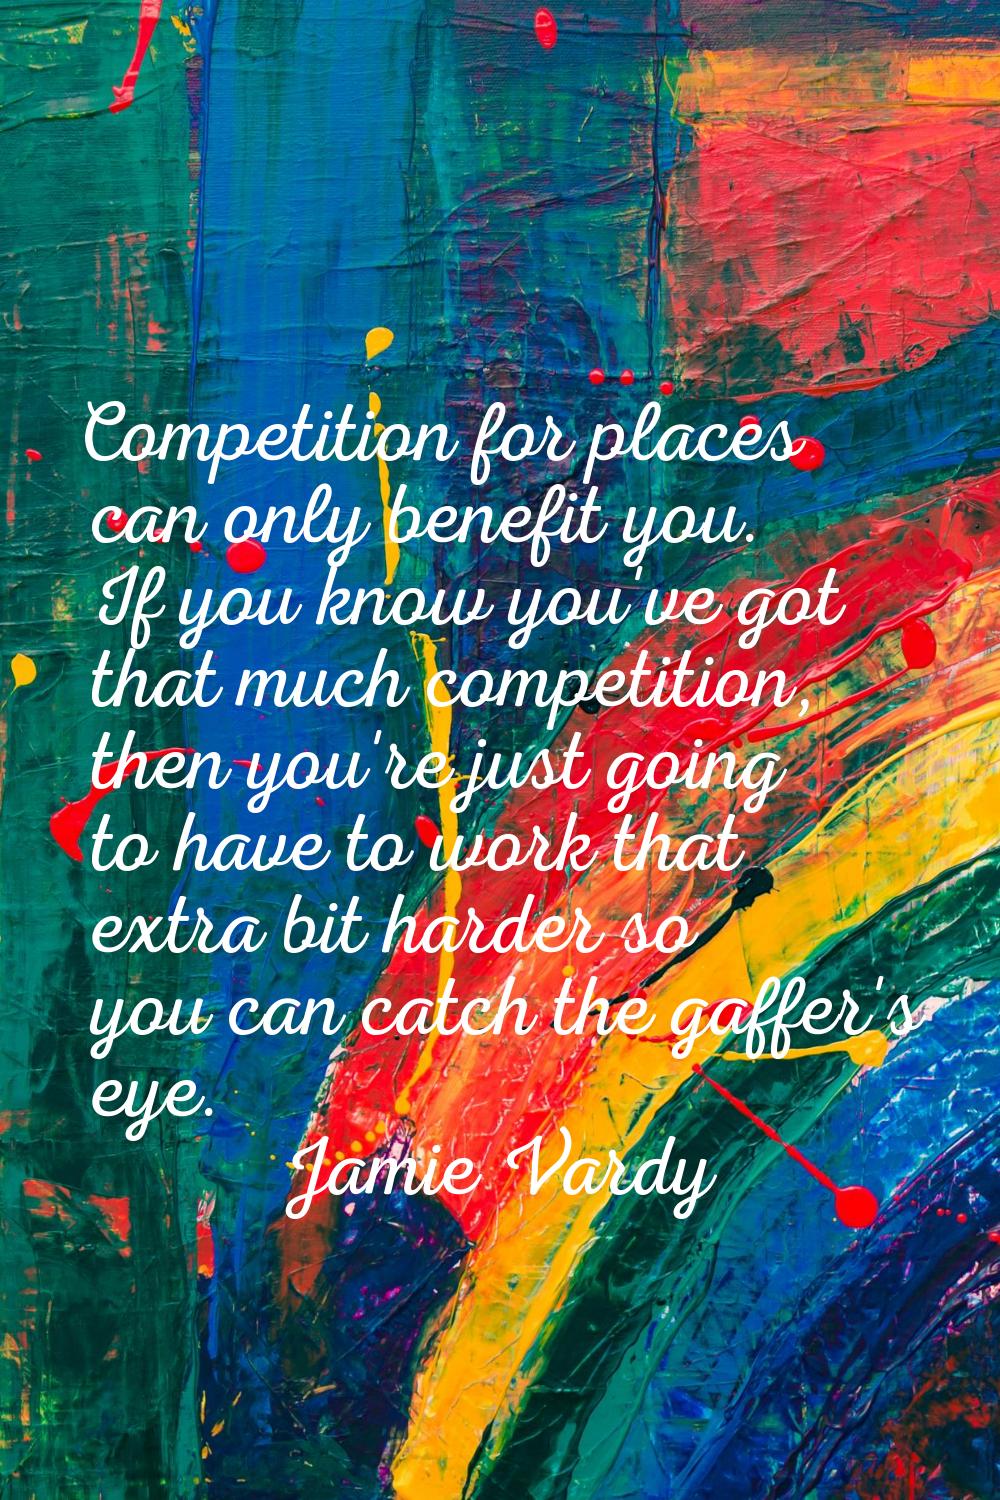 Competition for places can only benefit you. If you know you've got that much competition, then you